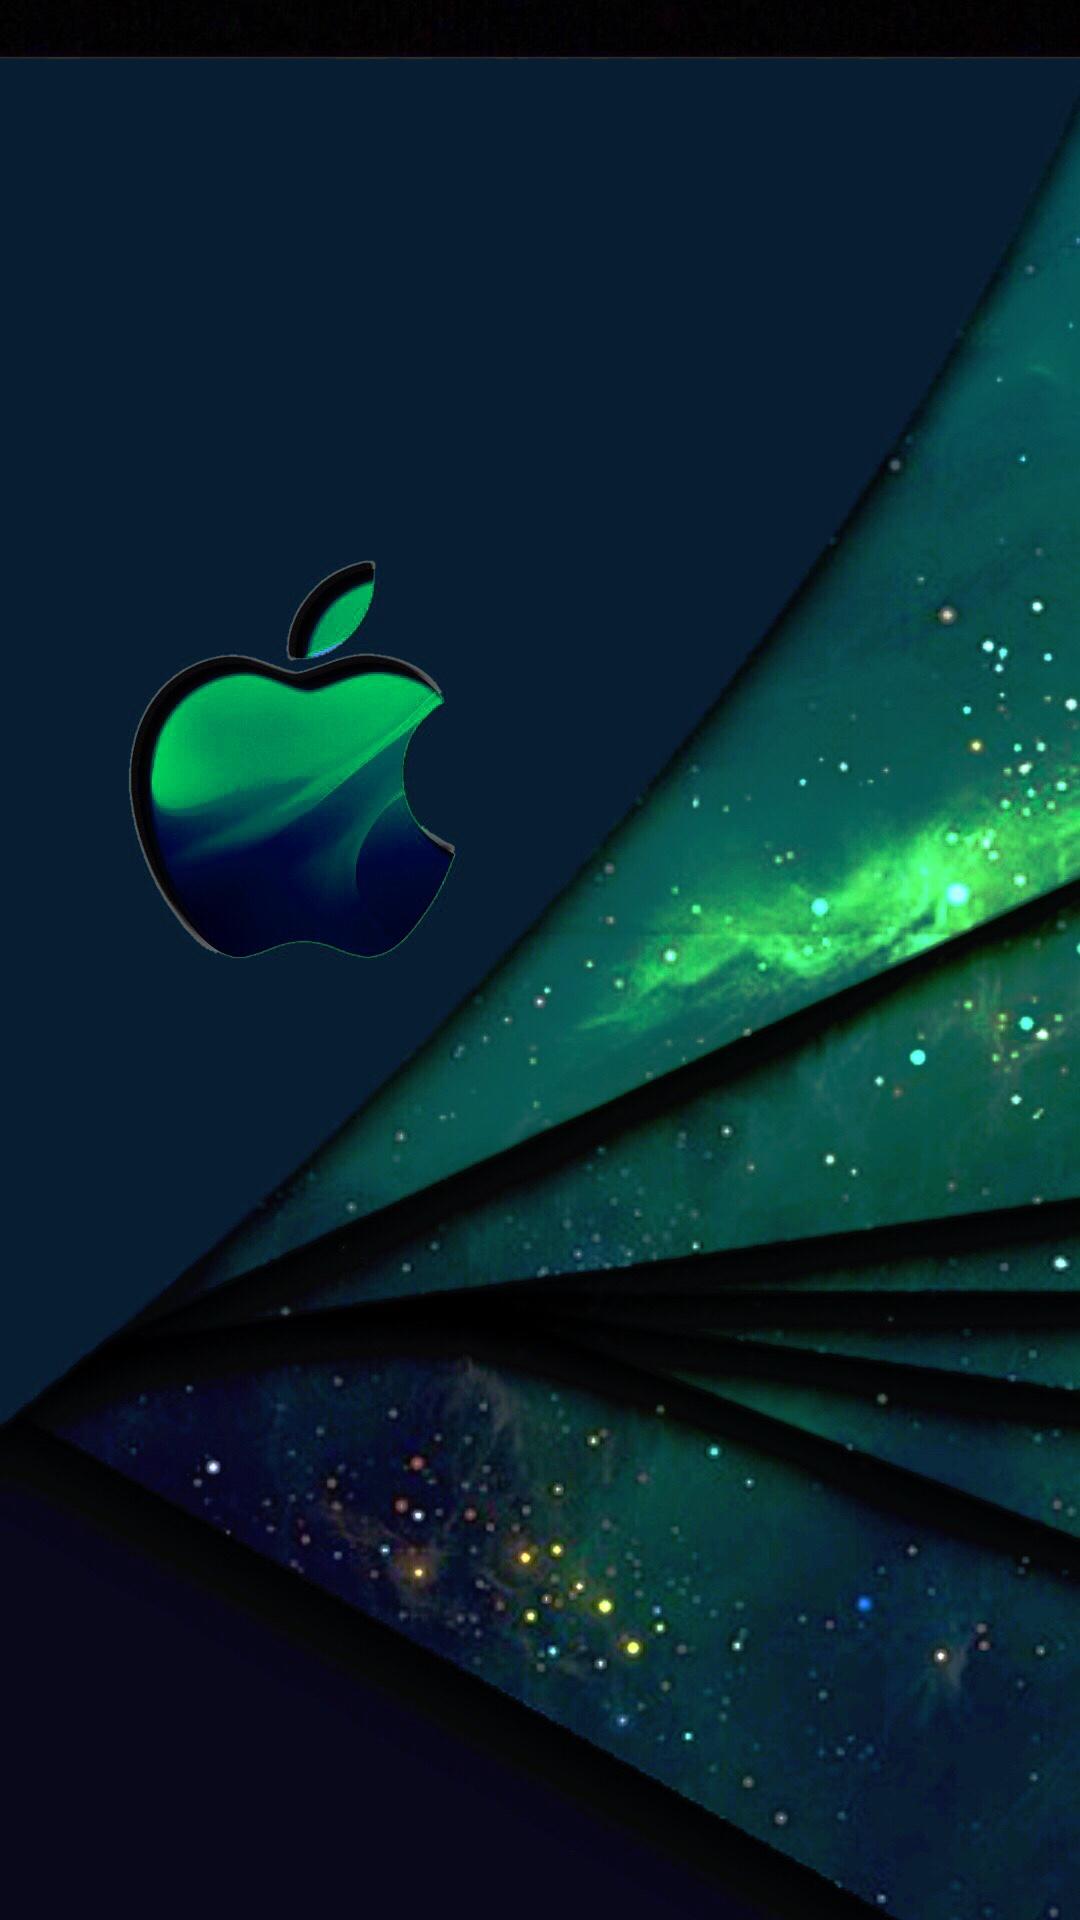 1080 x 1920 · jpeg - Apple Wallpaper..post your creative Apple wallpaper - Page 57 - iPhone ...